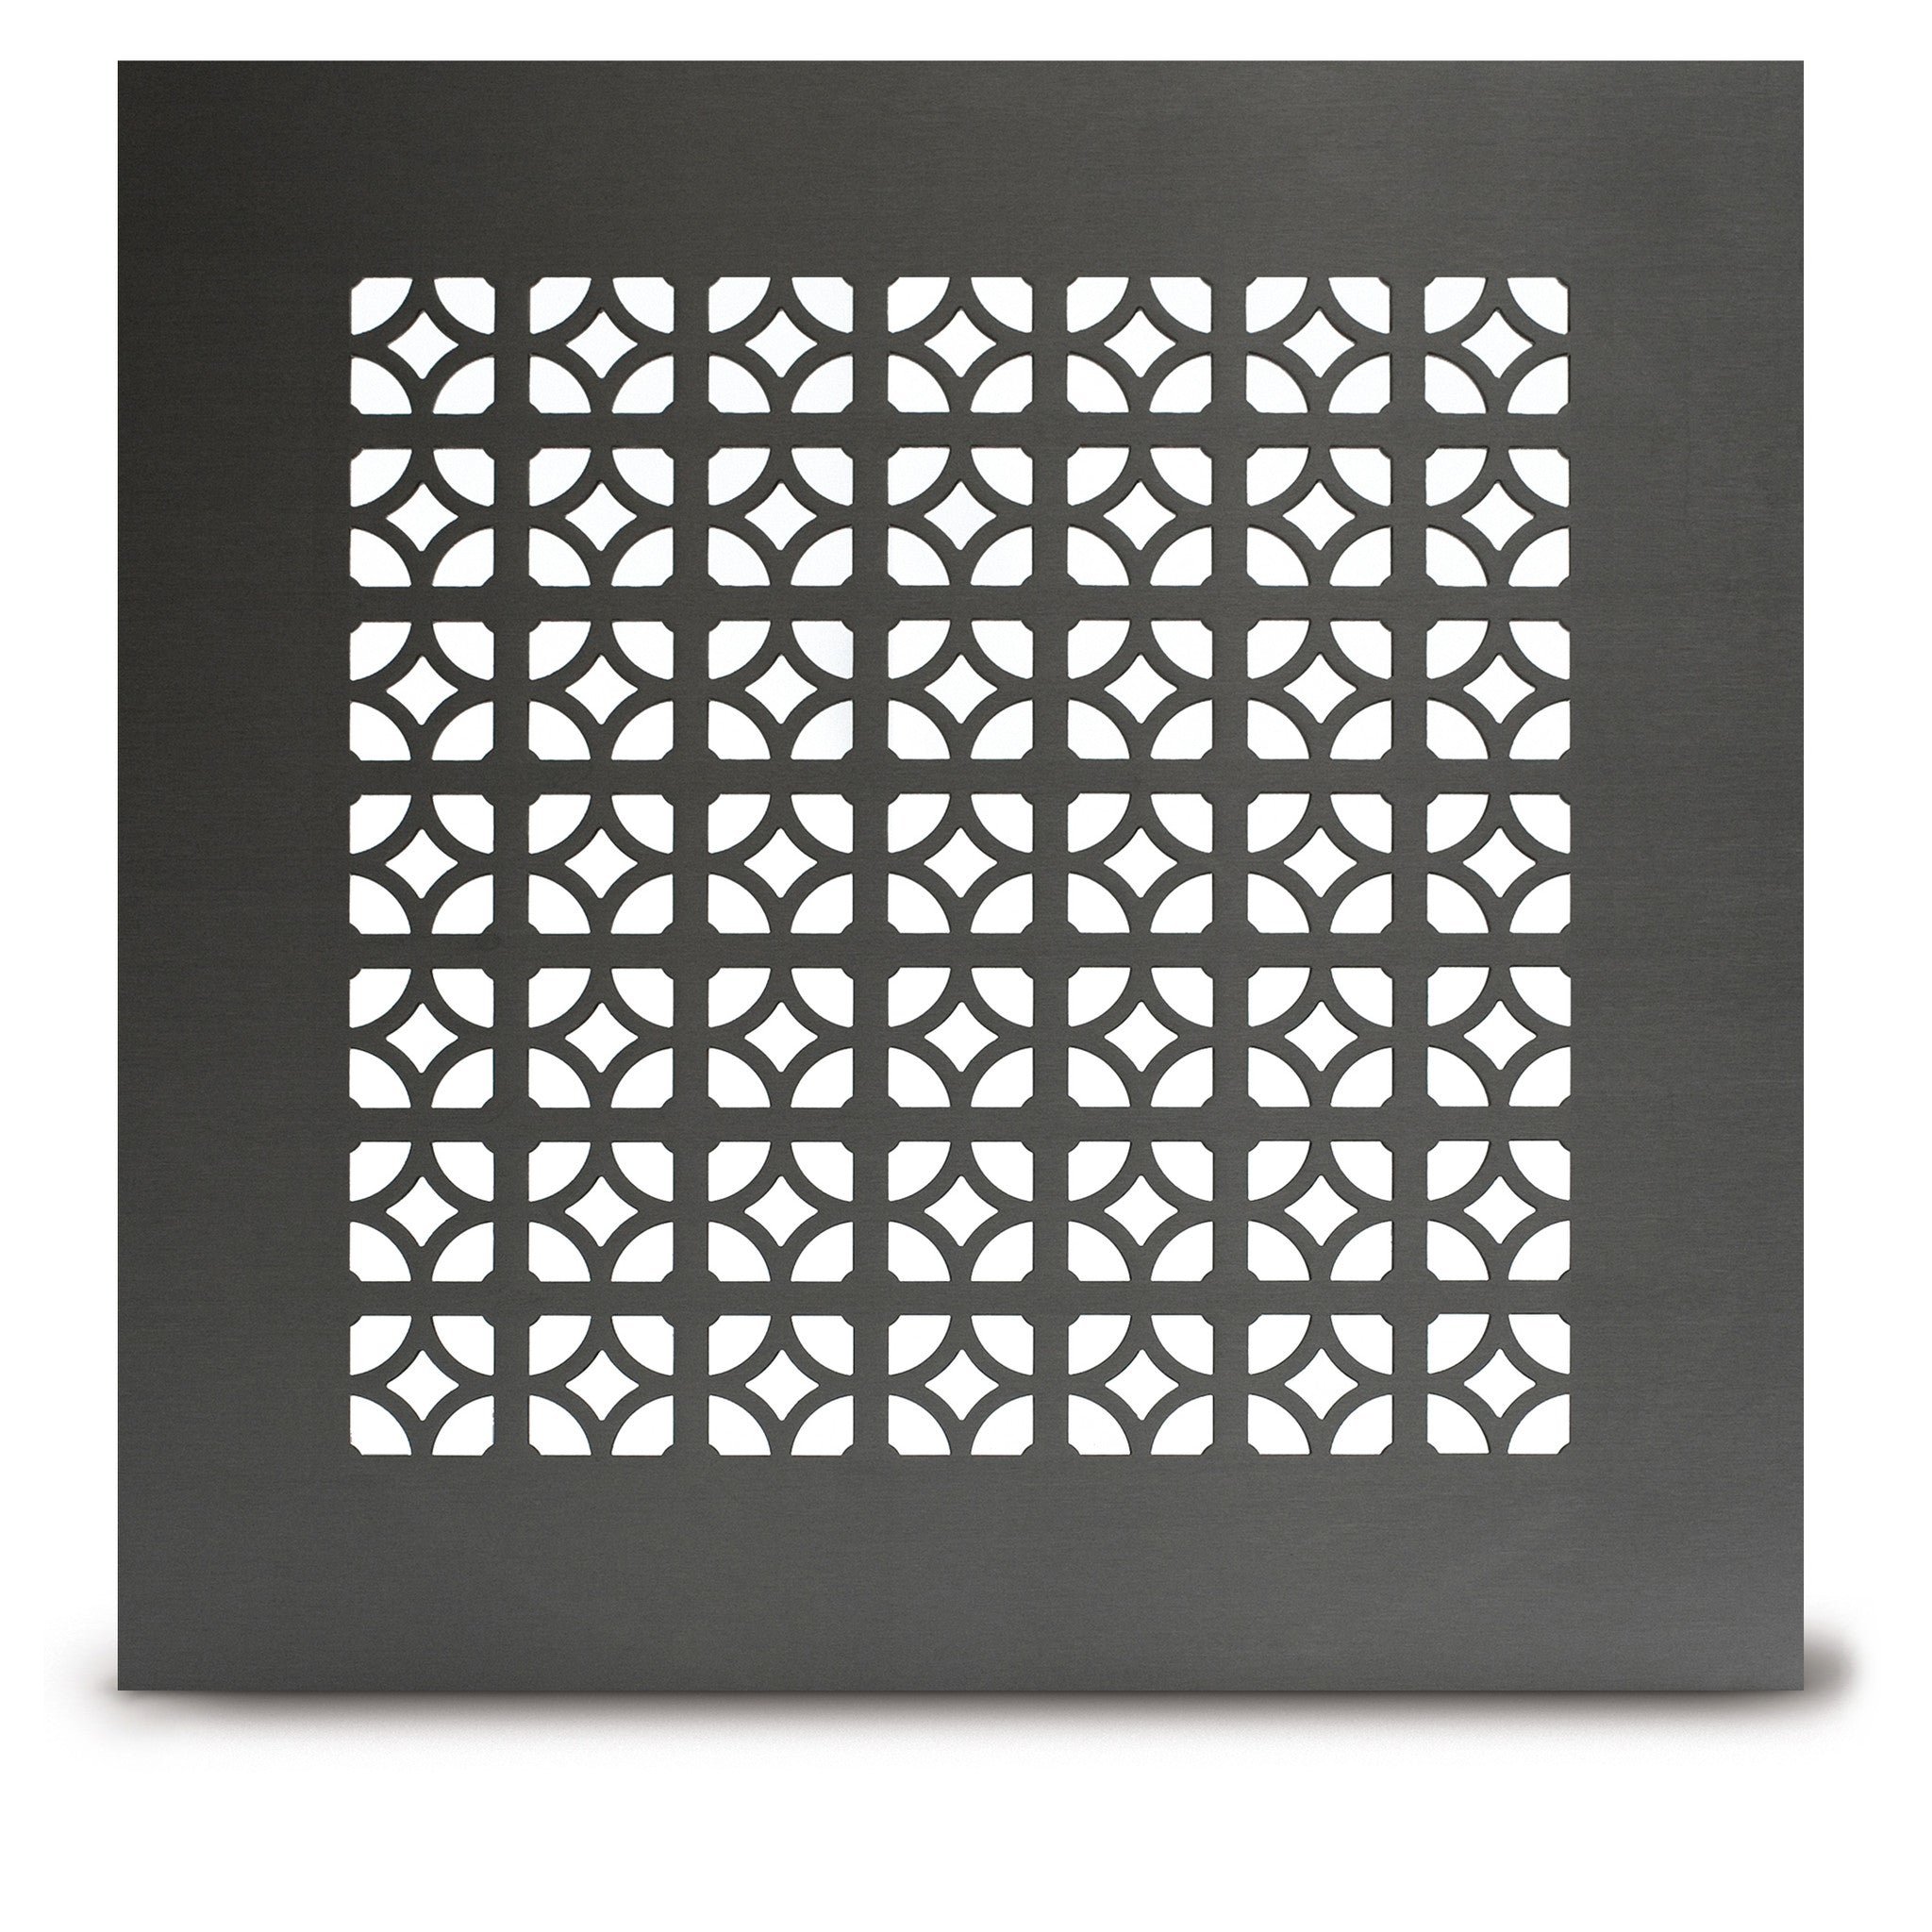 211 Egyptian Perforated Grille: 1” pattern - 40% open area